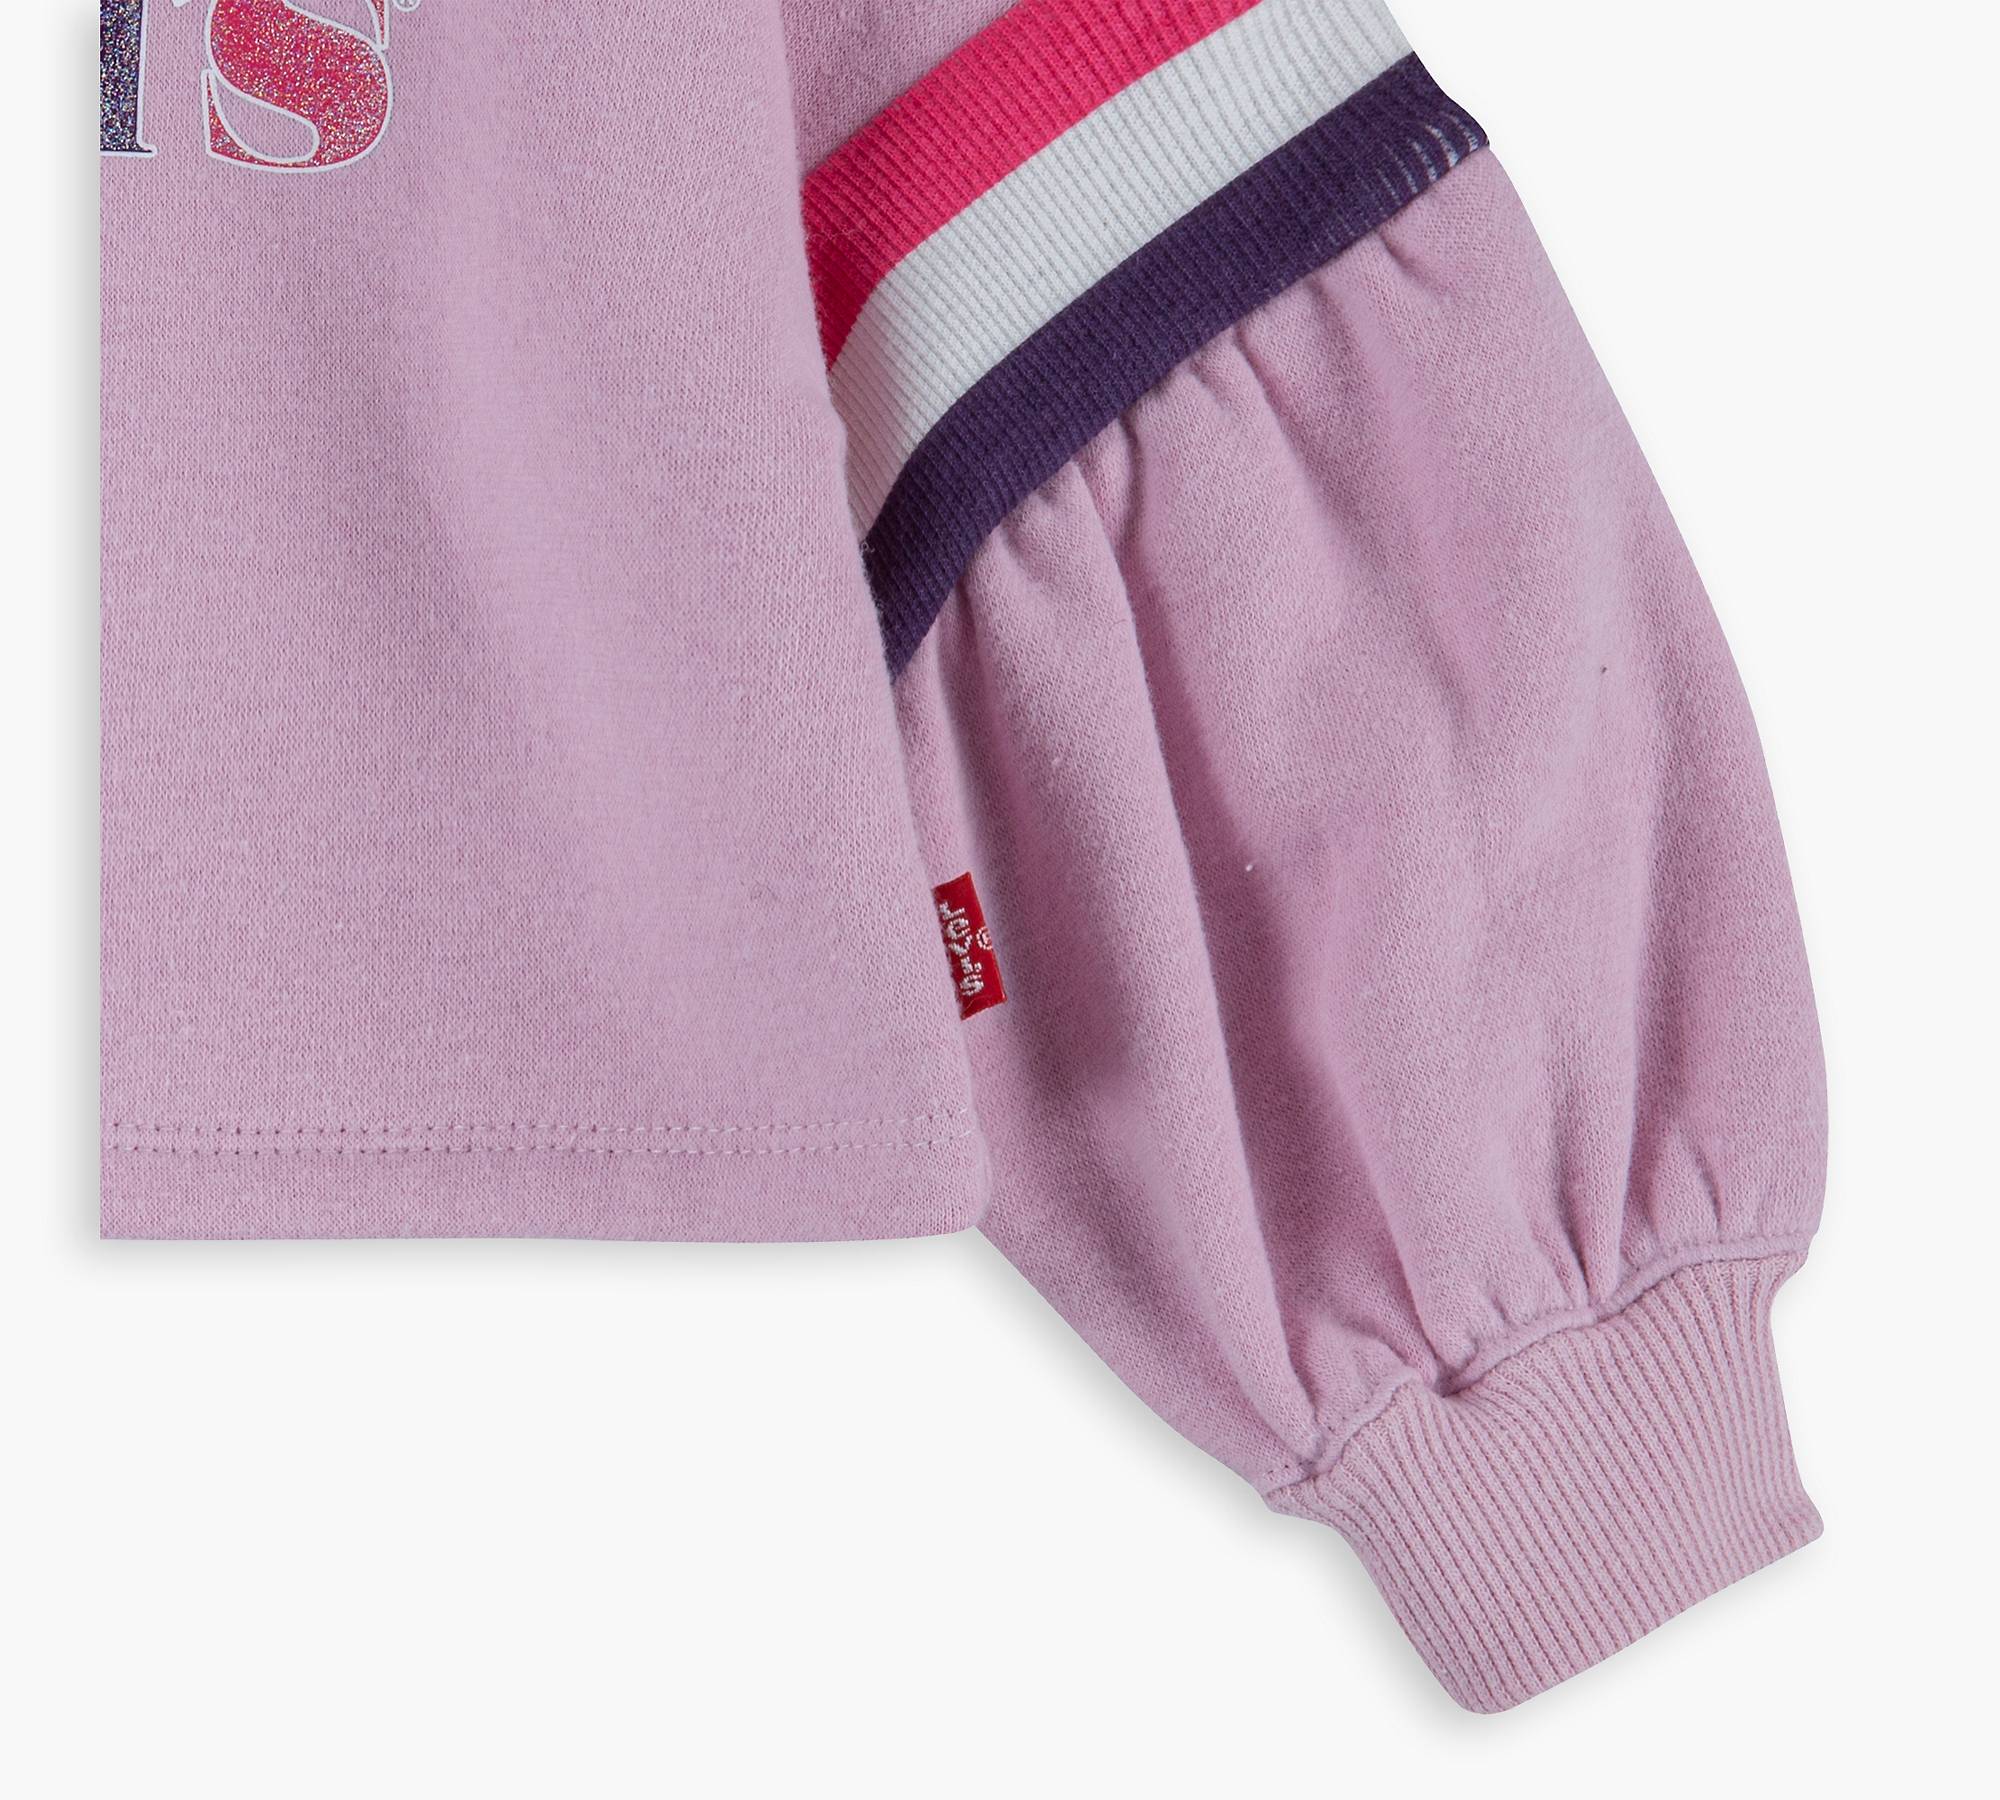 Baby Girls Rainbow Trim Hoodie And Jeans Set 12-24m - Pink | Levi's® US